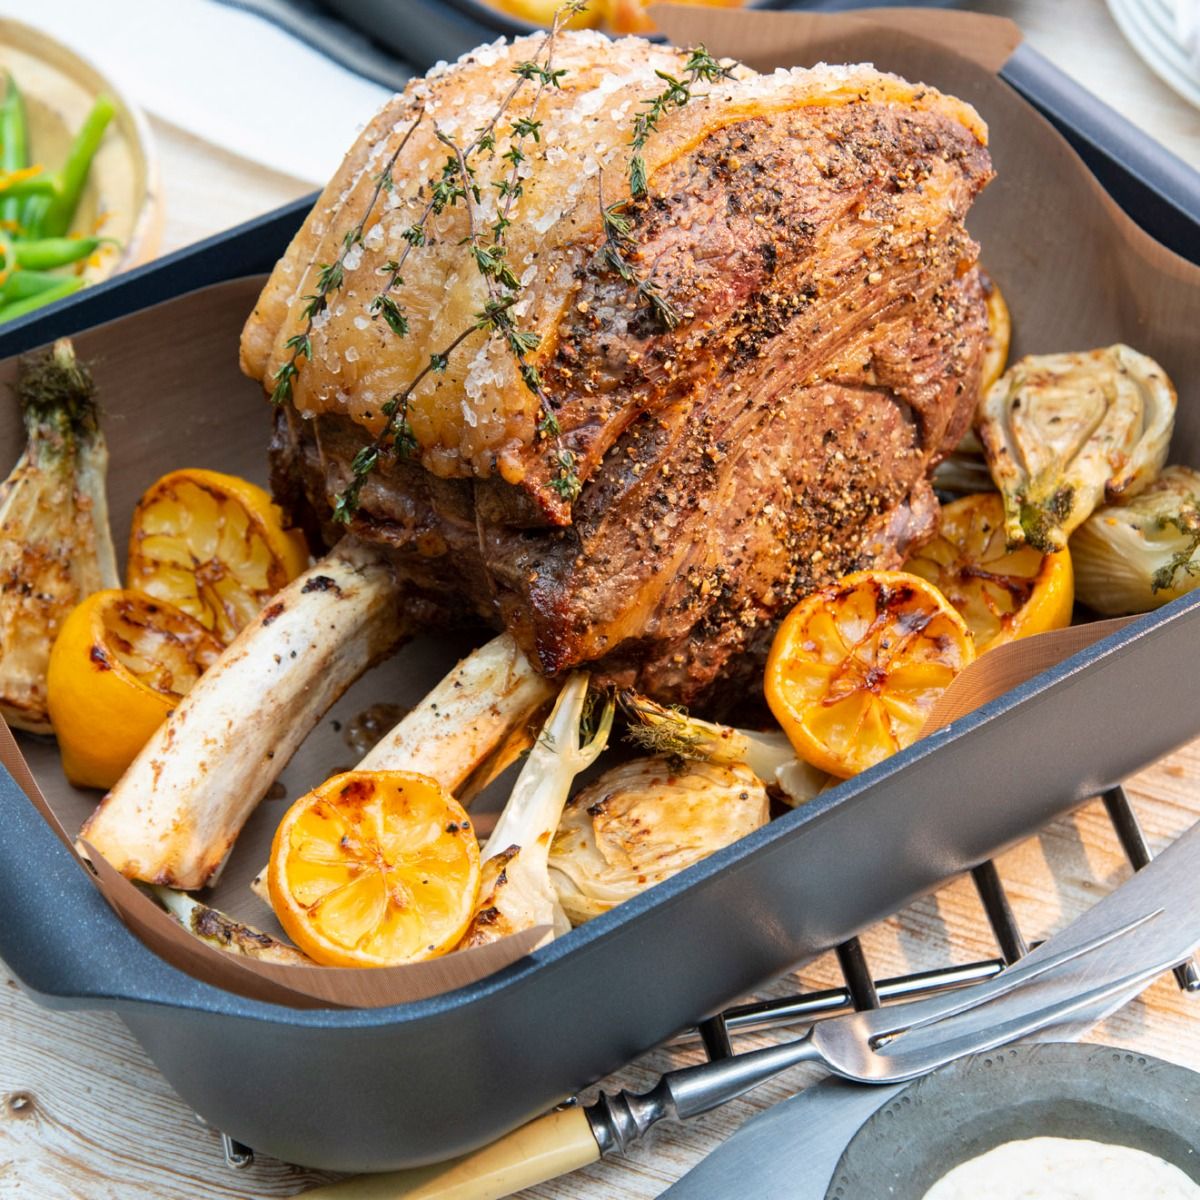 AGA Cast Aluminum Roaster with Griddle Lid